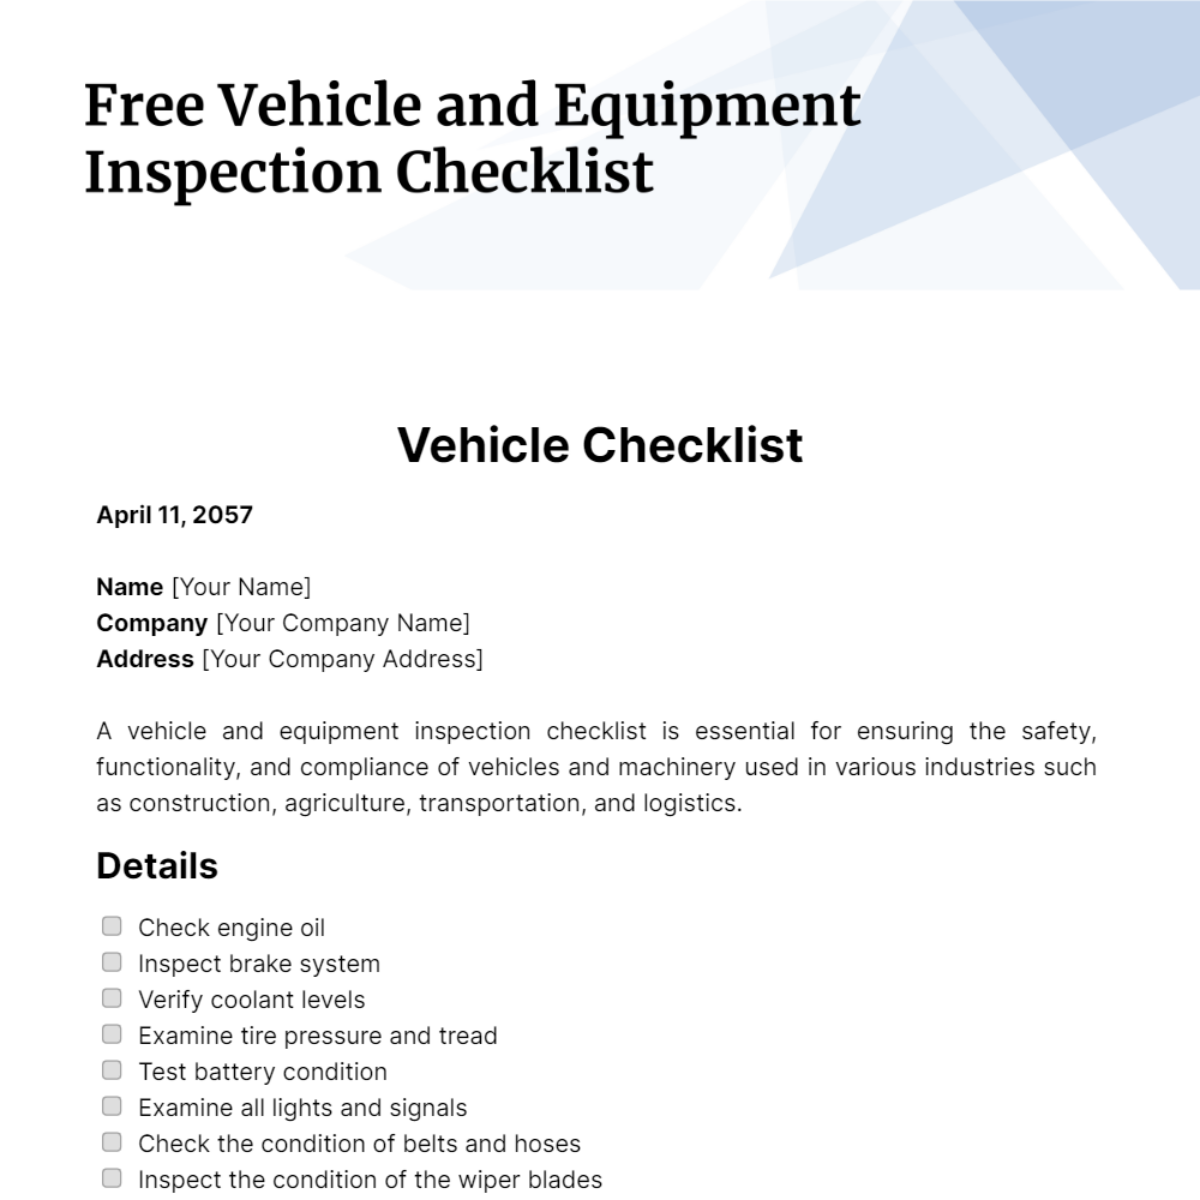 Vehicle and Equipment Inspection Checklist Template